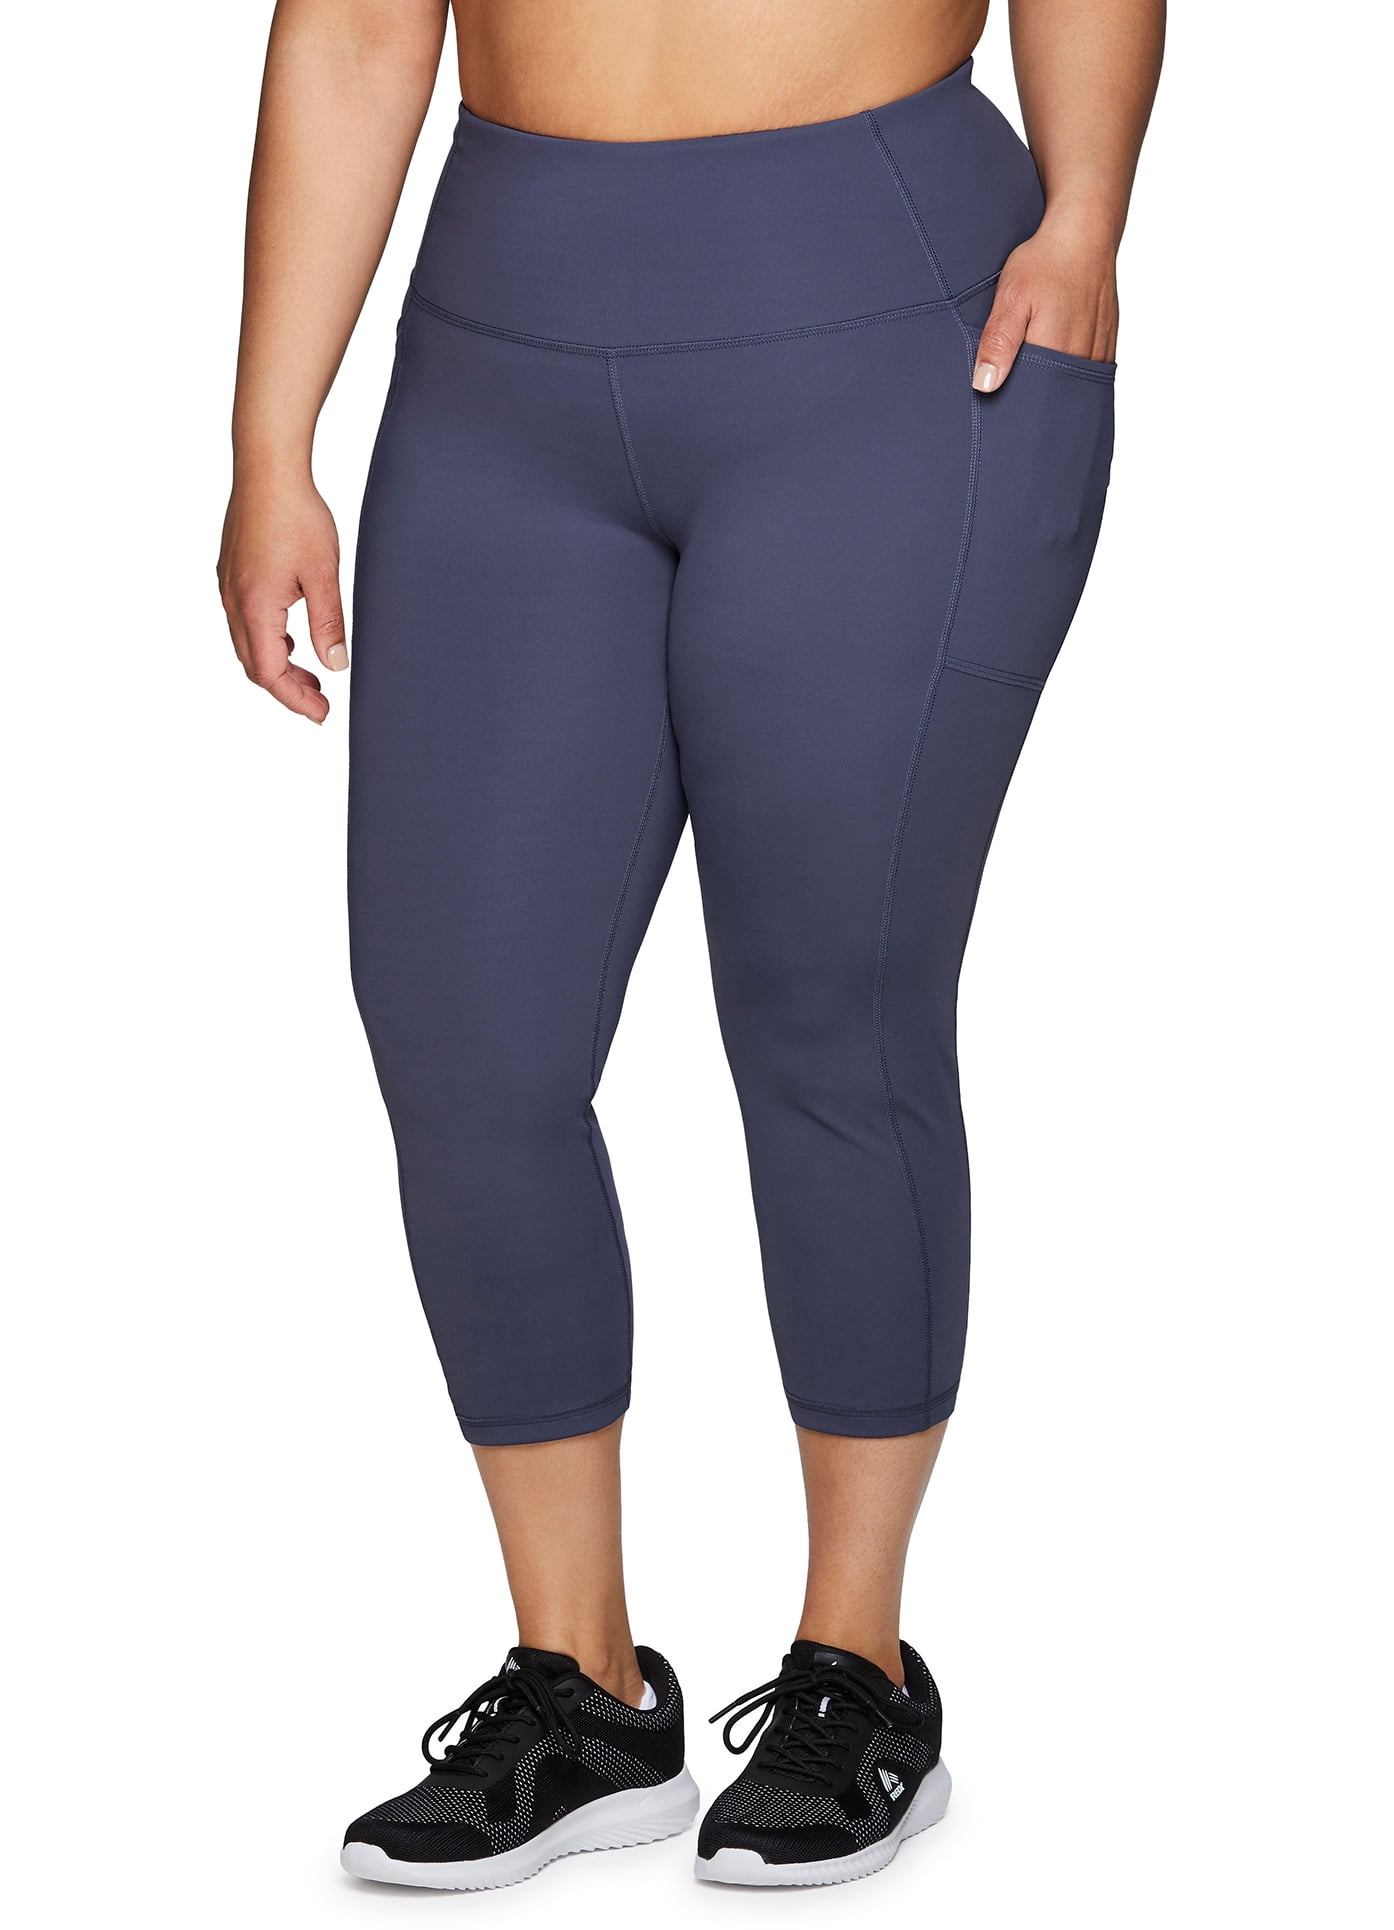 RBX Active Women's Full Length High Waist Ribbed Legging With Pockets 